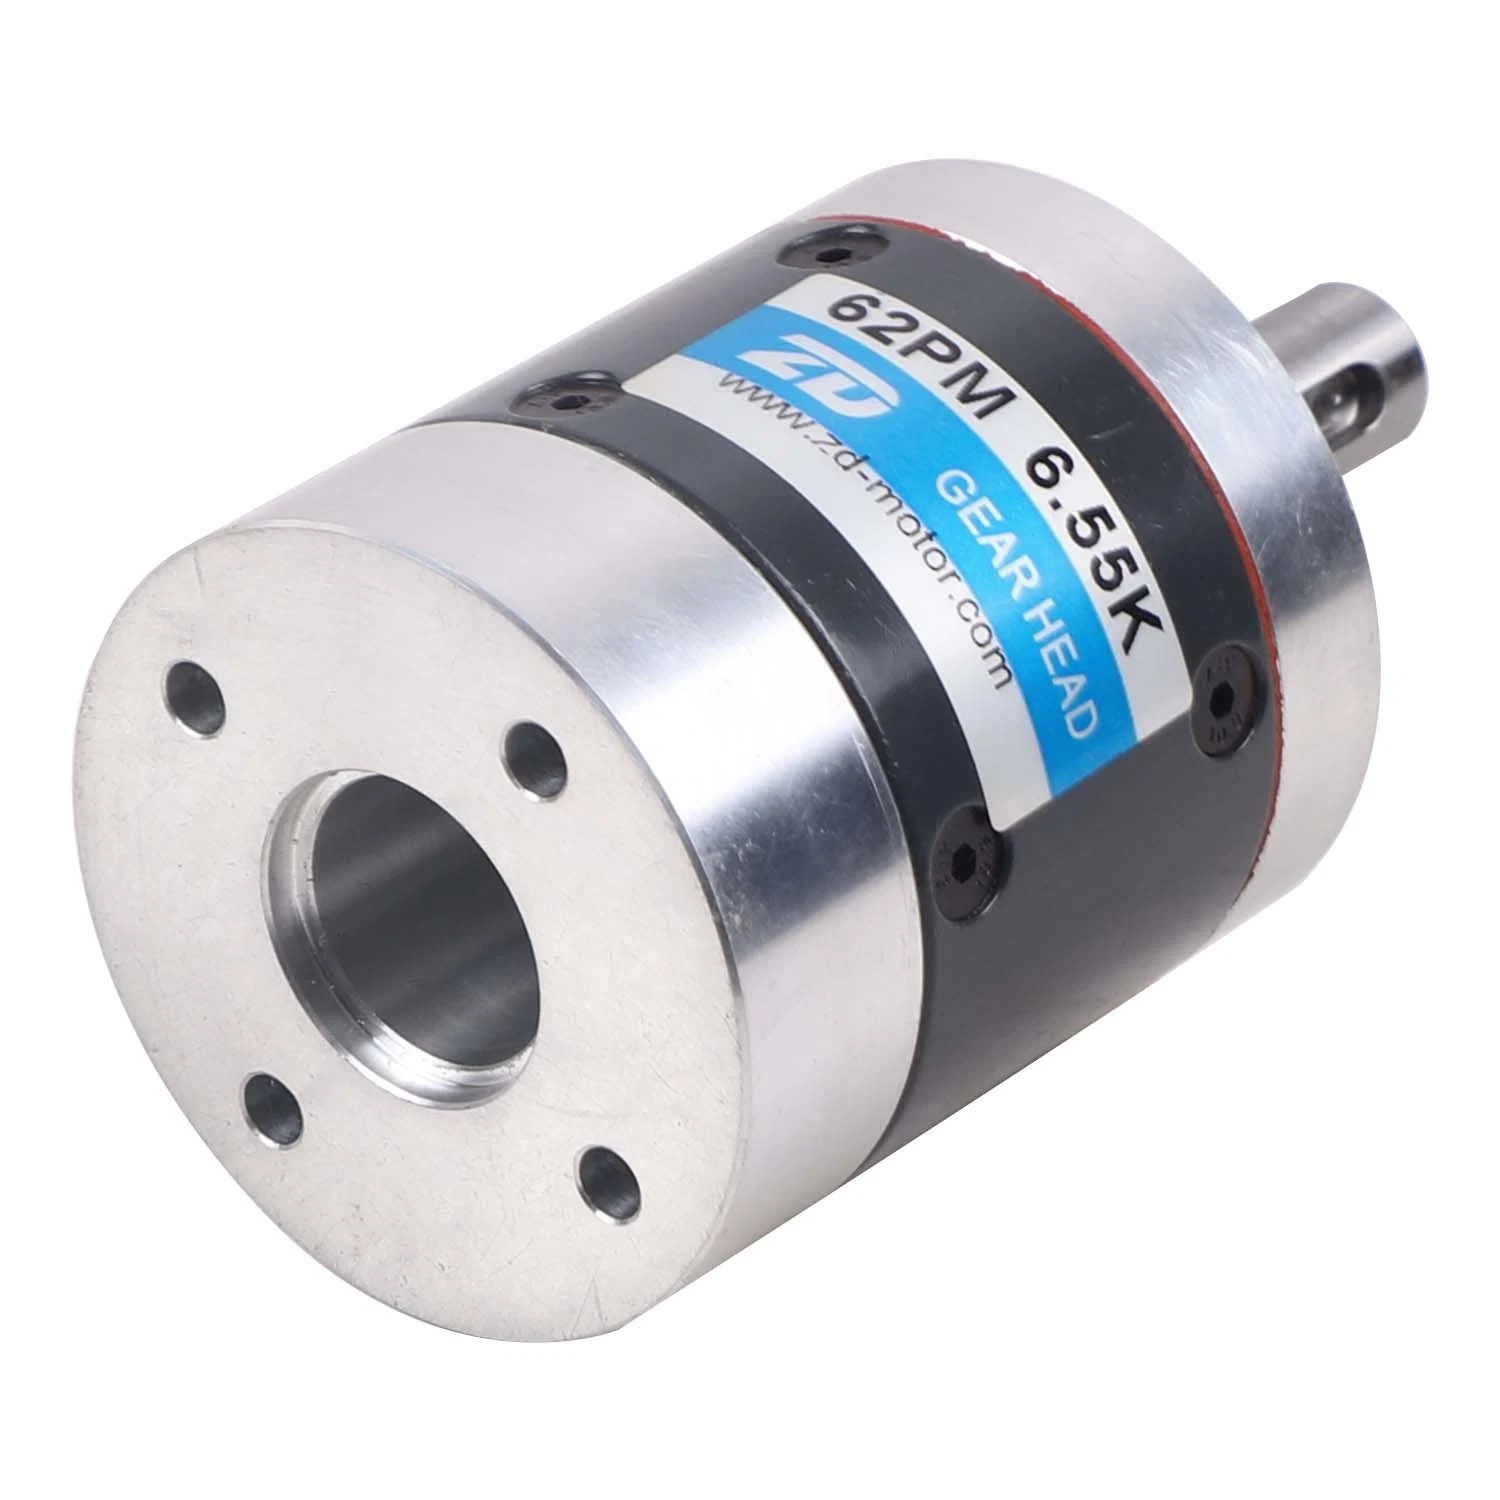 CE Certified Hot Selling electric motor planetary gear reduction speed reducer Gearbox